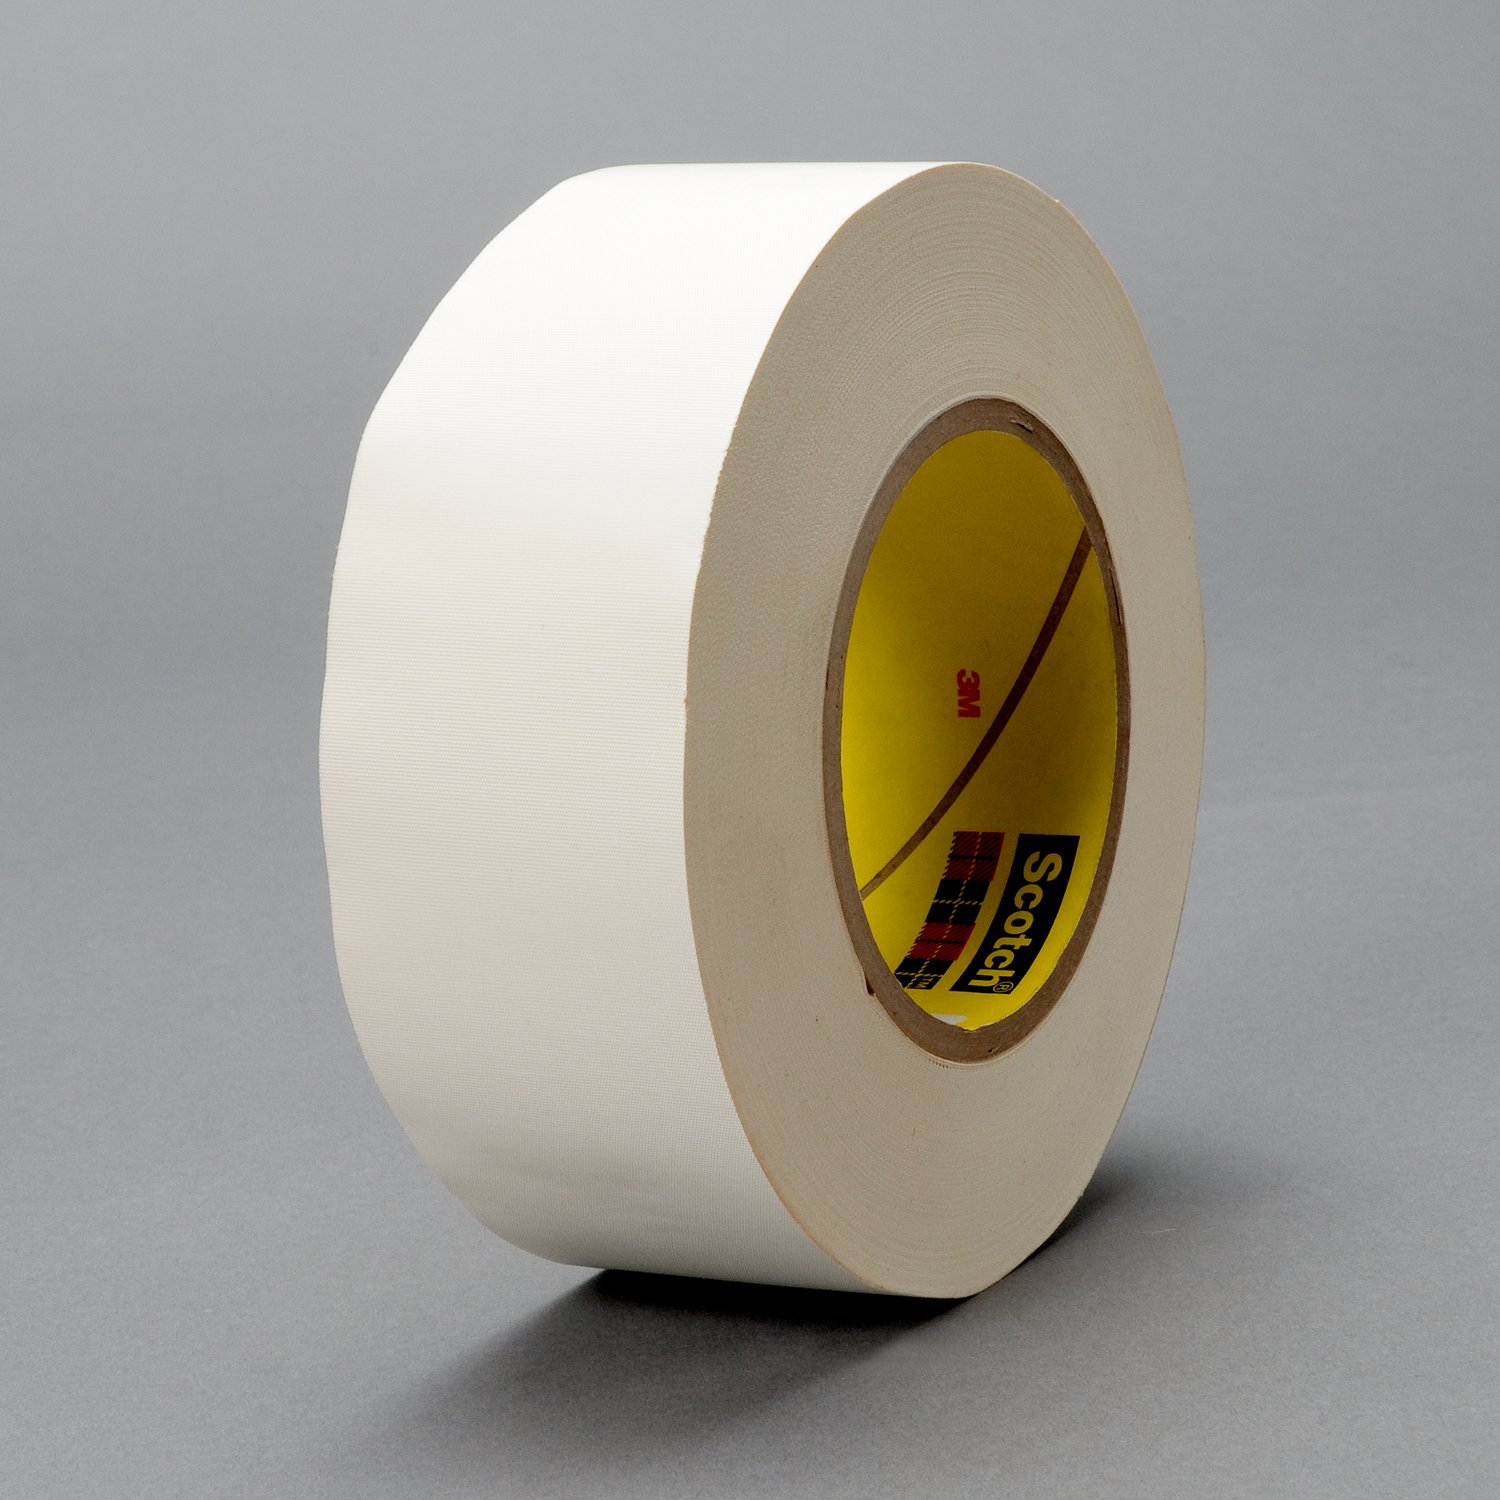 7100034270 - 3M Thermosetable Glass Cloth Tape 365, White, 3/4 in x 60 yd, 8.3 mil,
48 rolls per case